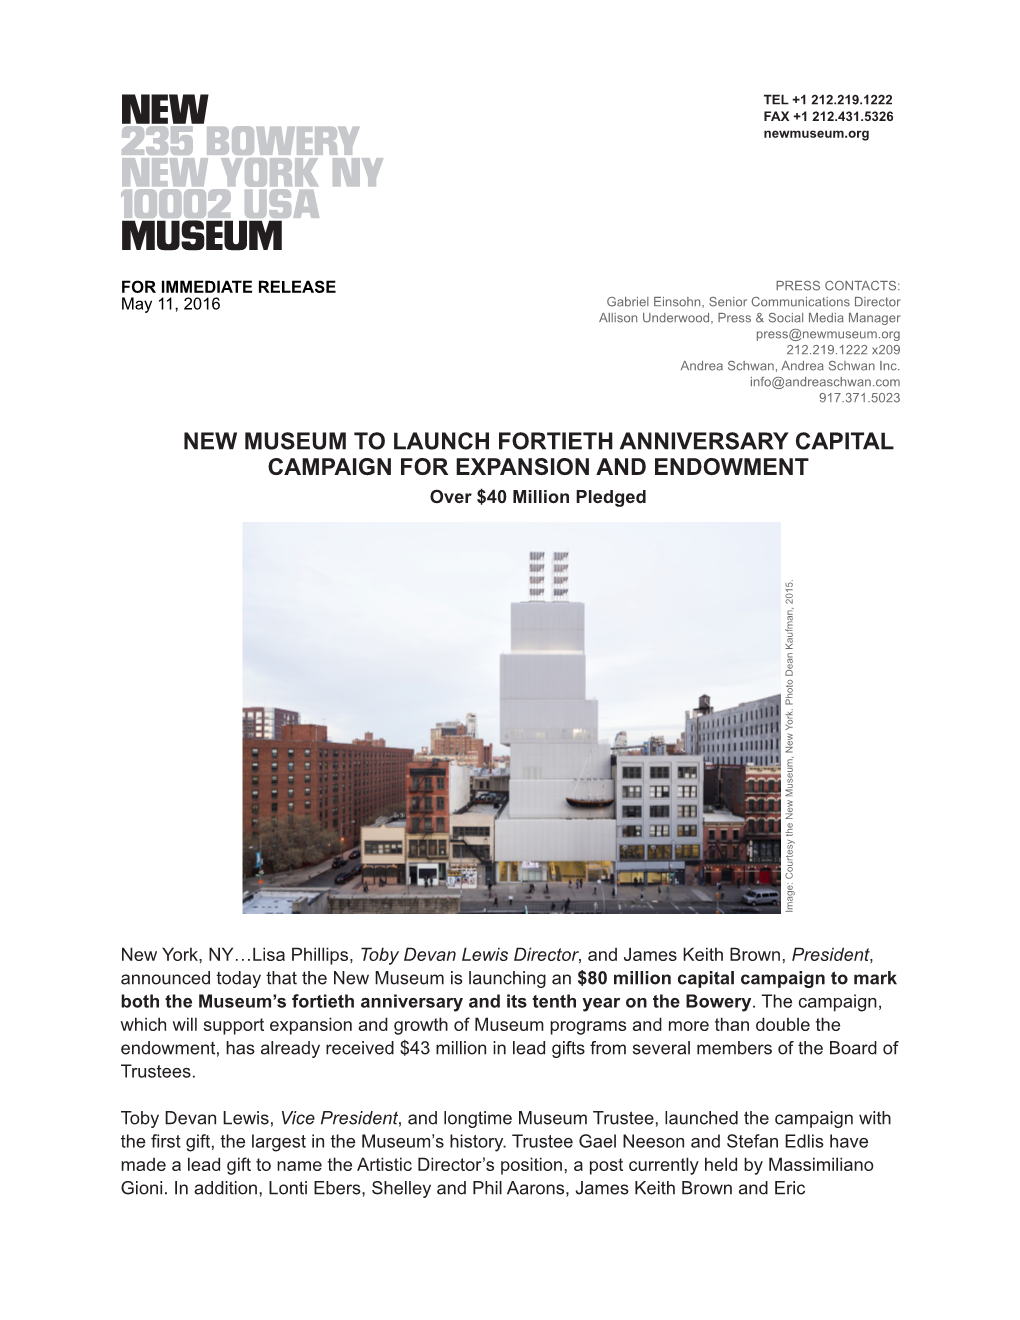 NEW MUSEUM to LAUNCH FORTIETH ANNIVERSARY CAPITAL CAMPAIGN for EXPANSION and ENDOWMENT Over $40 Million Pledged Image: Courtesy the New Museum, New York